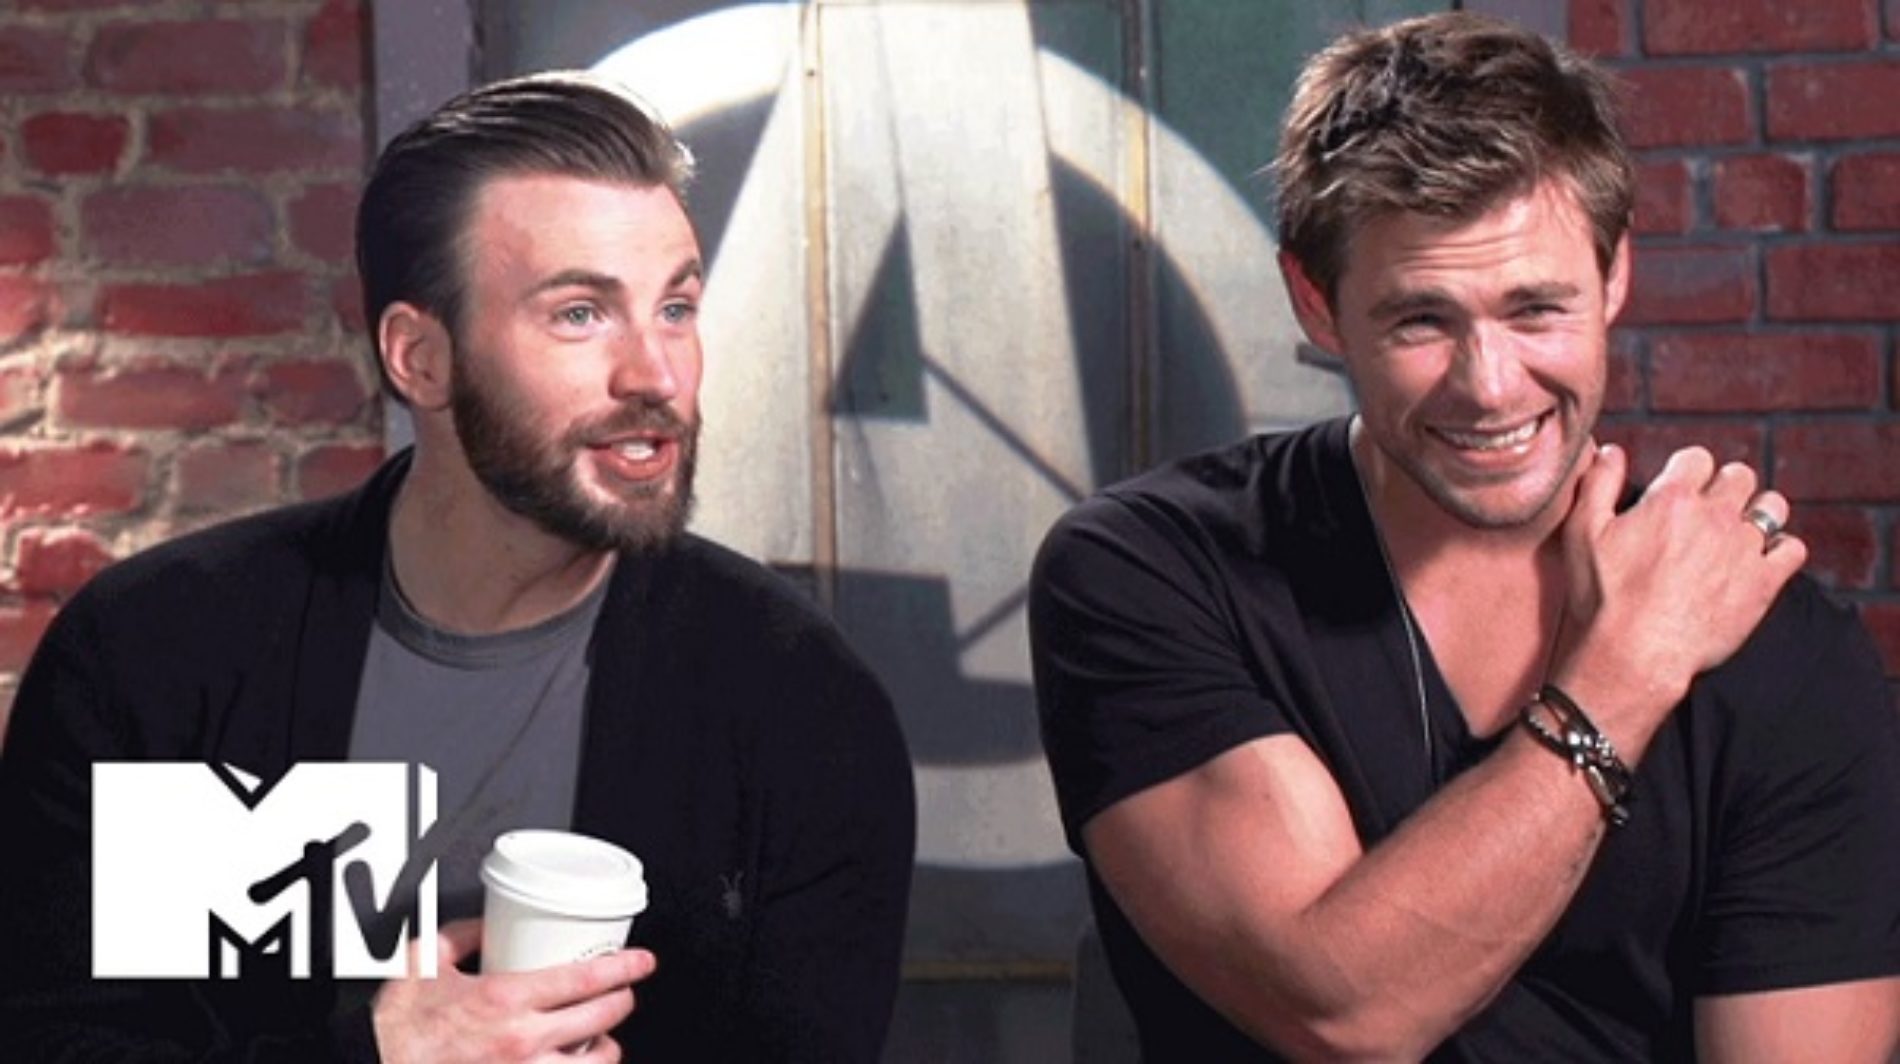 All About The Cast Of The Avengers…And Their Biceps